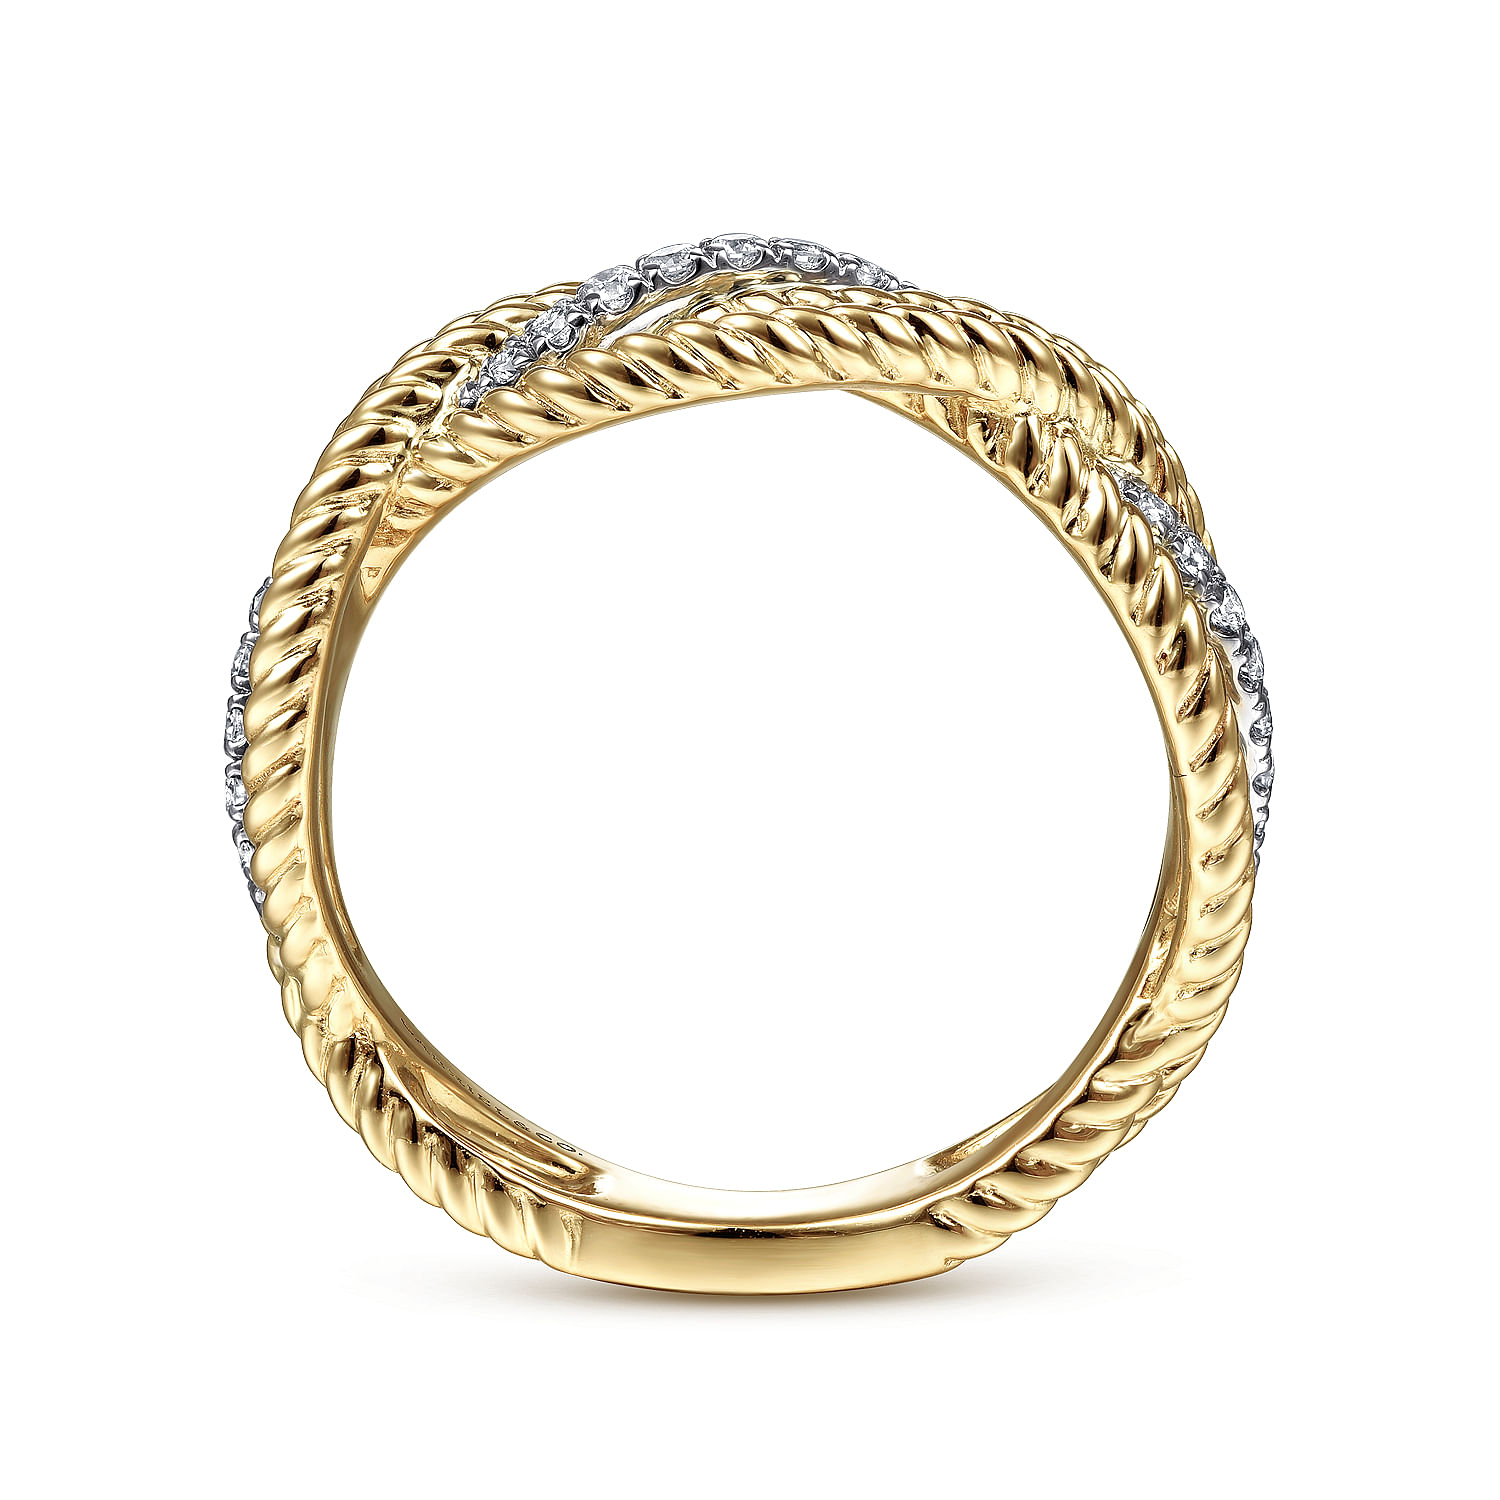 14K White-Yellow Gold Twisted Rope and Diamond Intersecting Ring